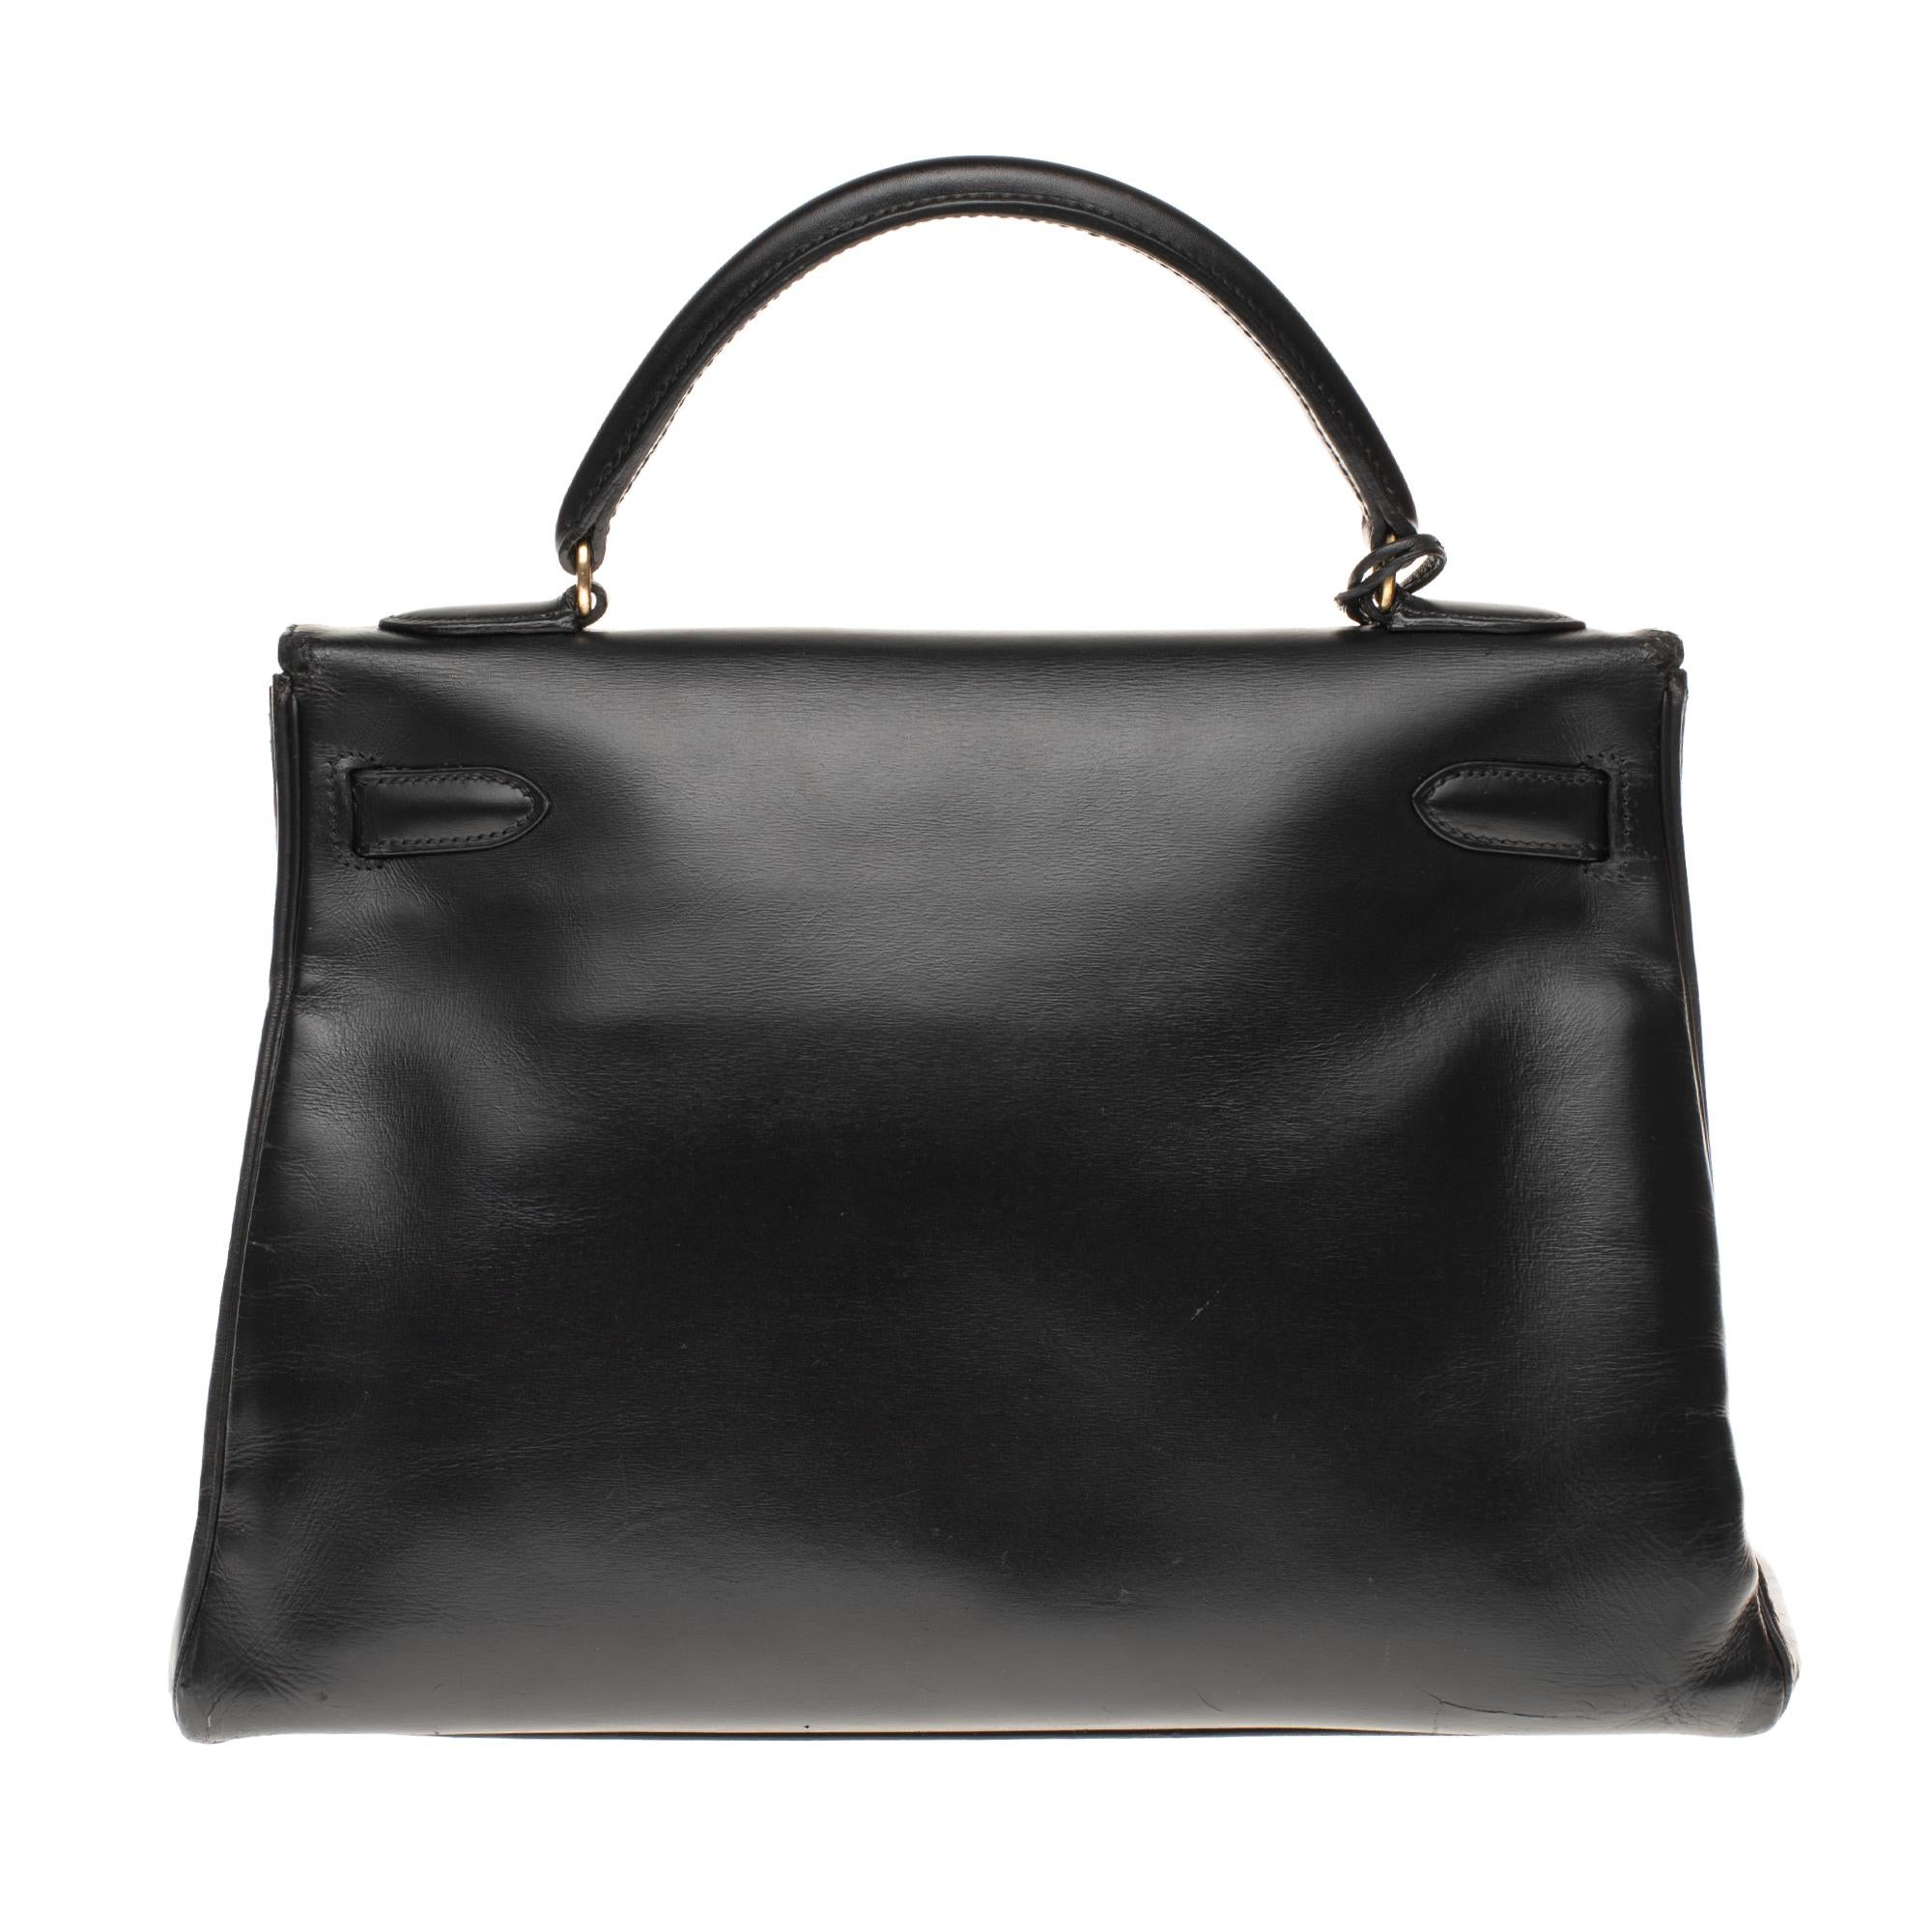 Beautiful Hermes Kelly Bag retourné 32 cm in black calfskin box, gold-plated metal trim, single handle in black leather, removable shoulder strap in black leather allowing a handheld or shoulder.
Closure by flap.
Black leather inner lining, one